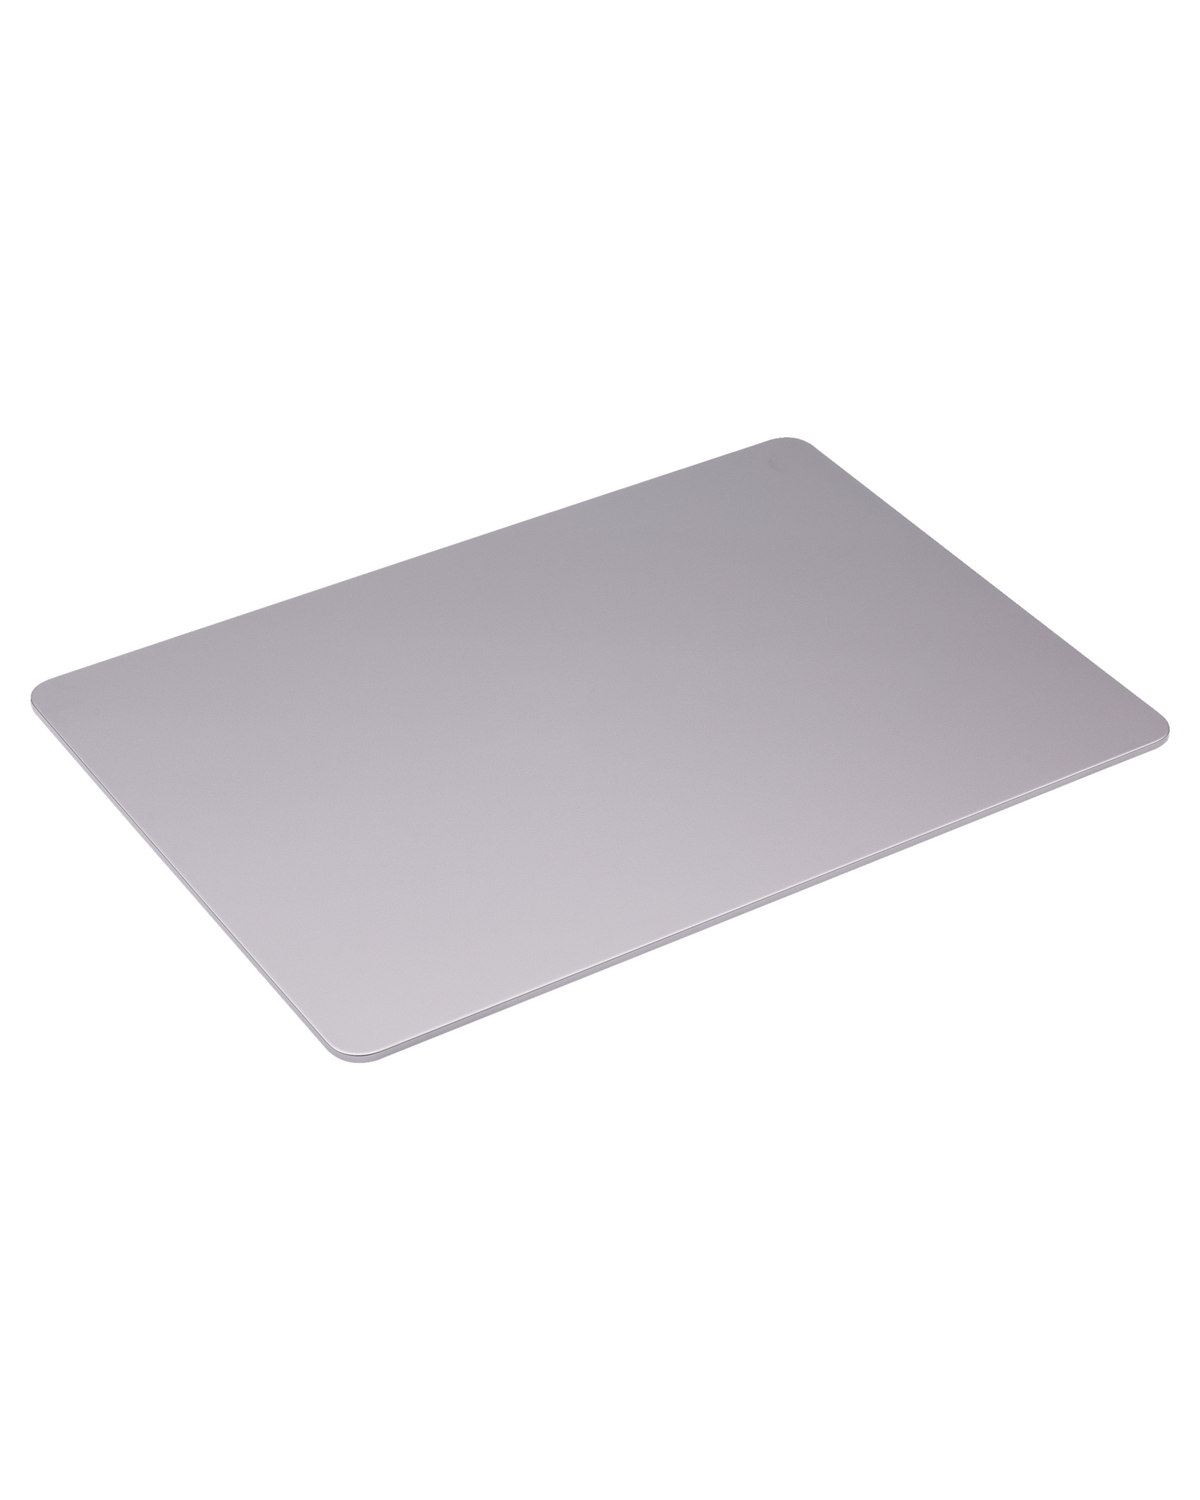 Complete LCD Display Assembly Compatible For MacBook Air 13" (A2681 / Mid 2022) (Aftermarket Plus) (Space Gray)